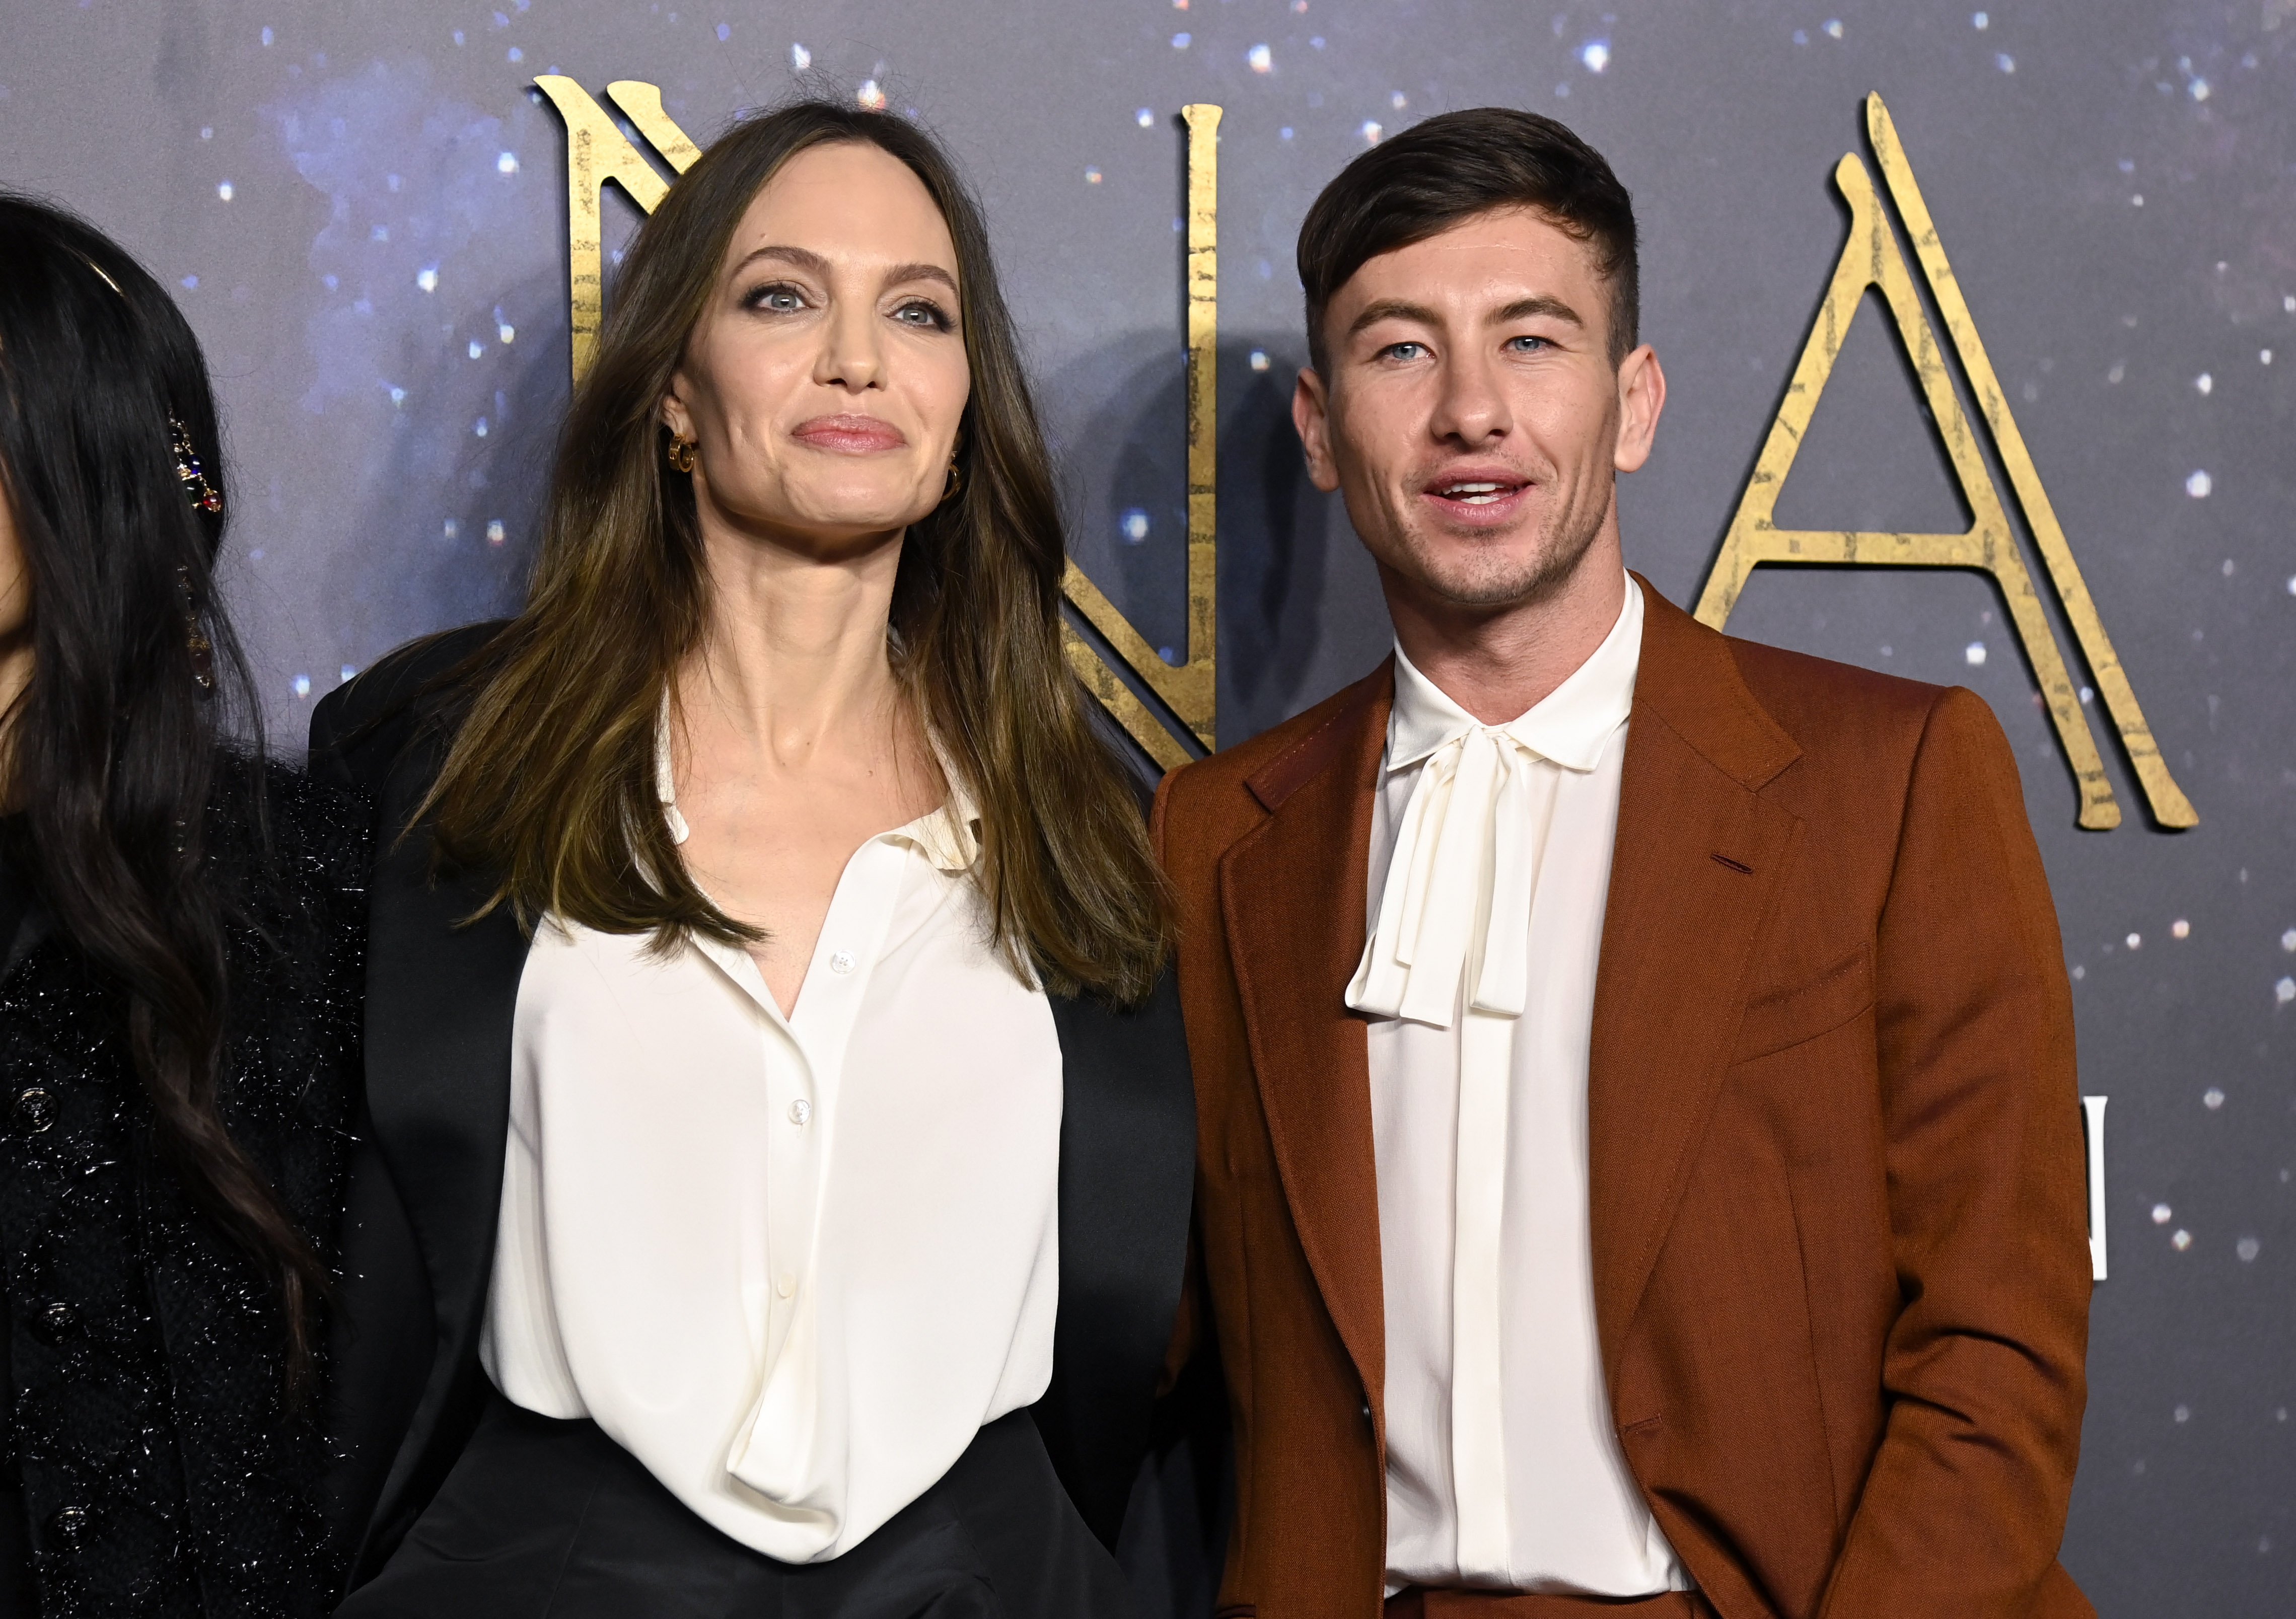 Angelina Jolie and Barry Keoghan at the UK premiere of "Eternals" on October 27, 2021, in London | Source: Getty Images